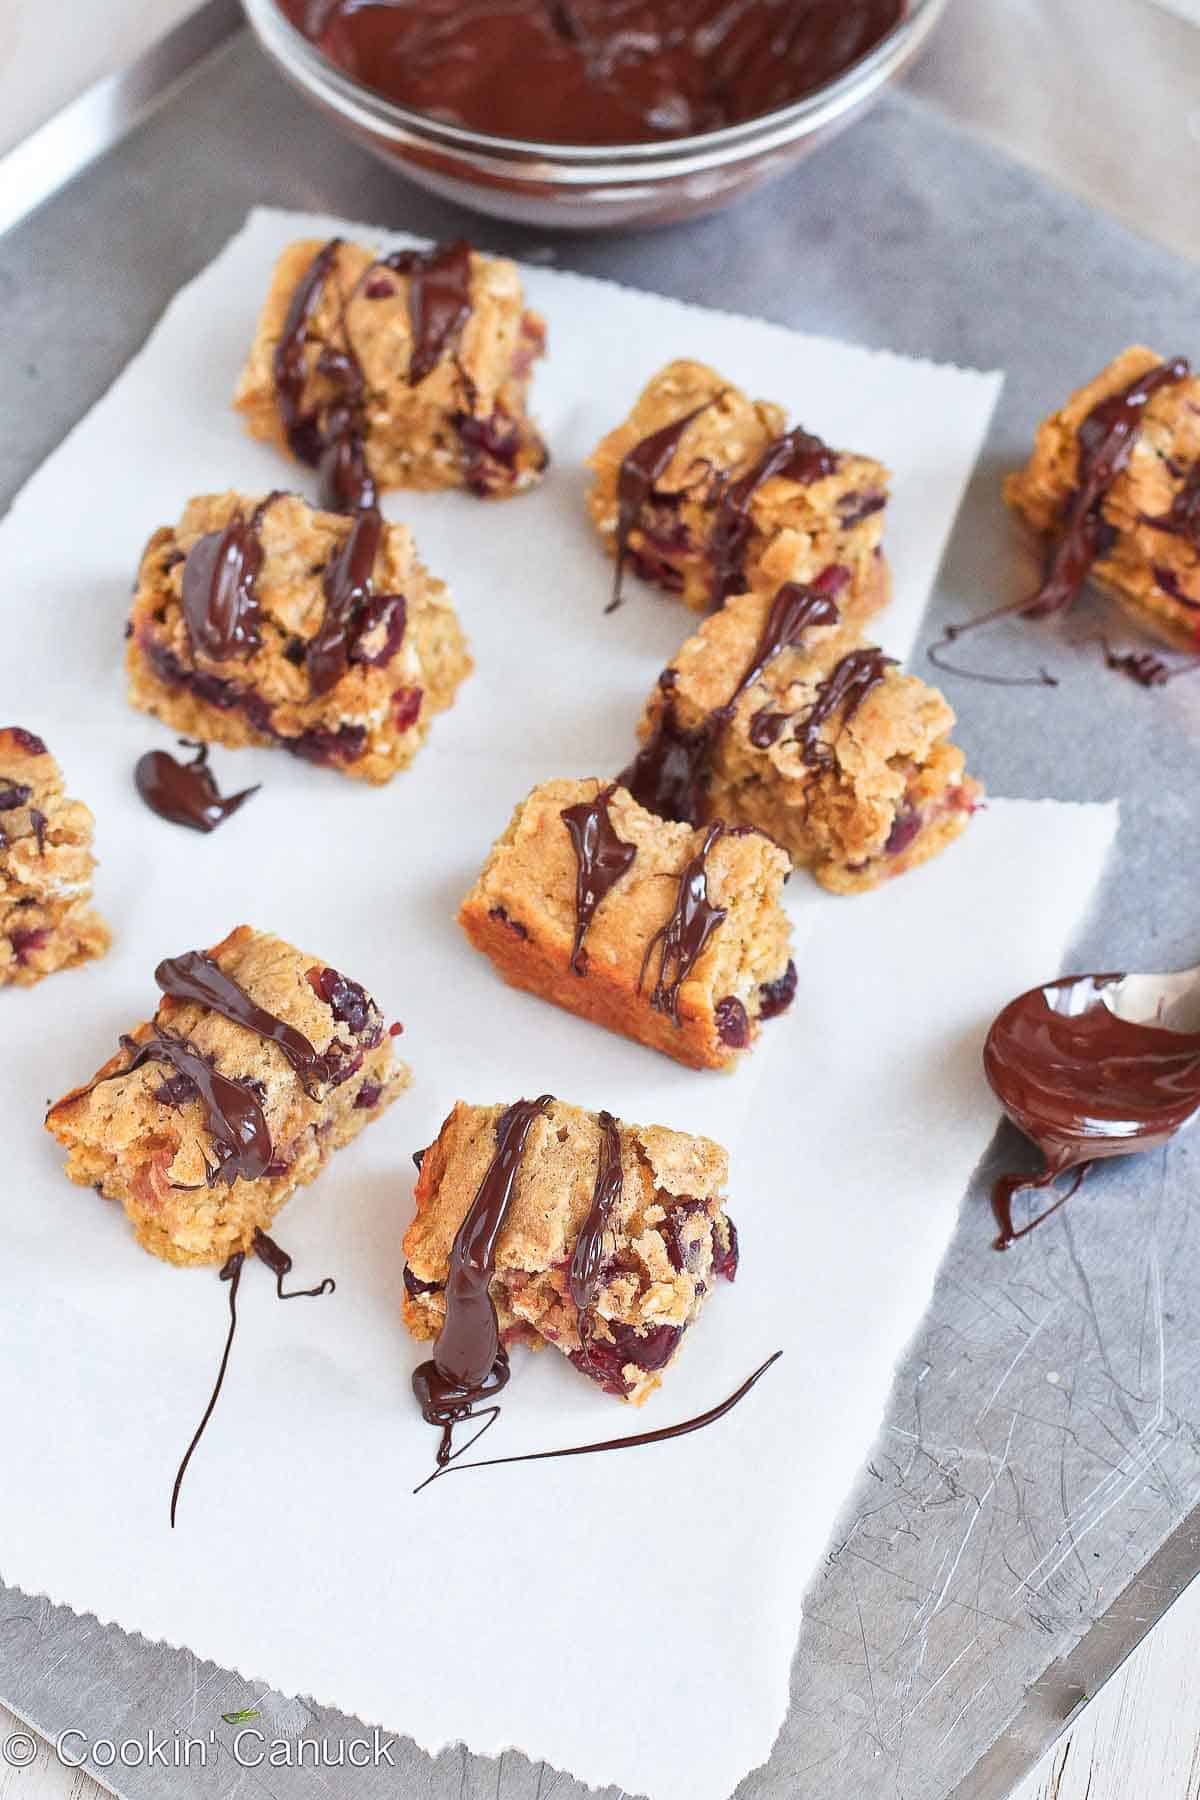 Oatmeal bars with cranberries on a baking sheet, drizzled with chocolate.